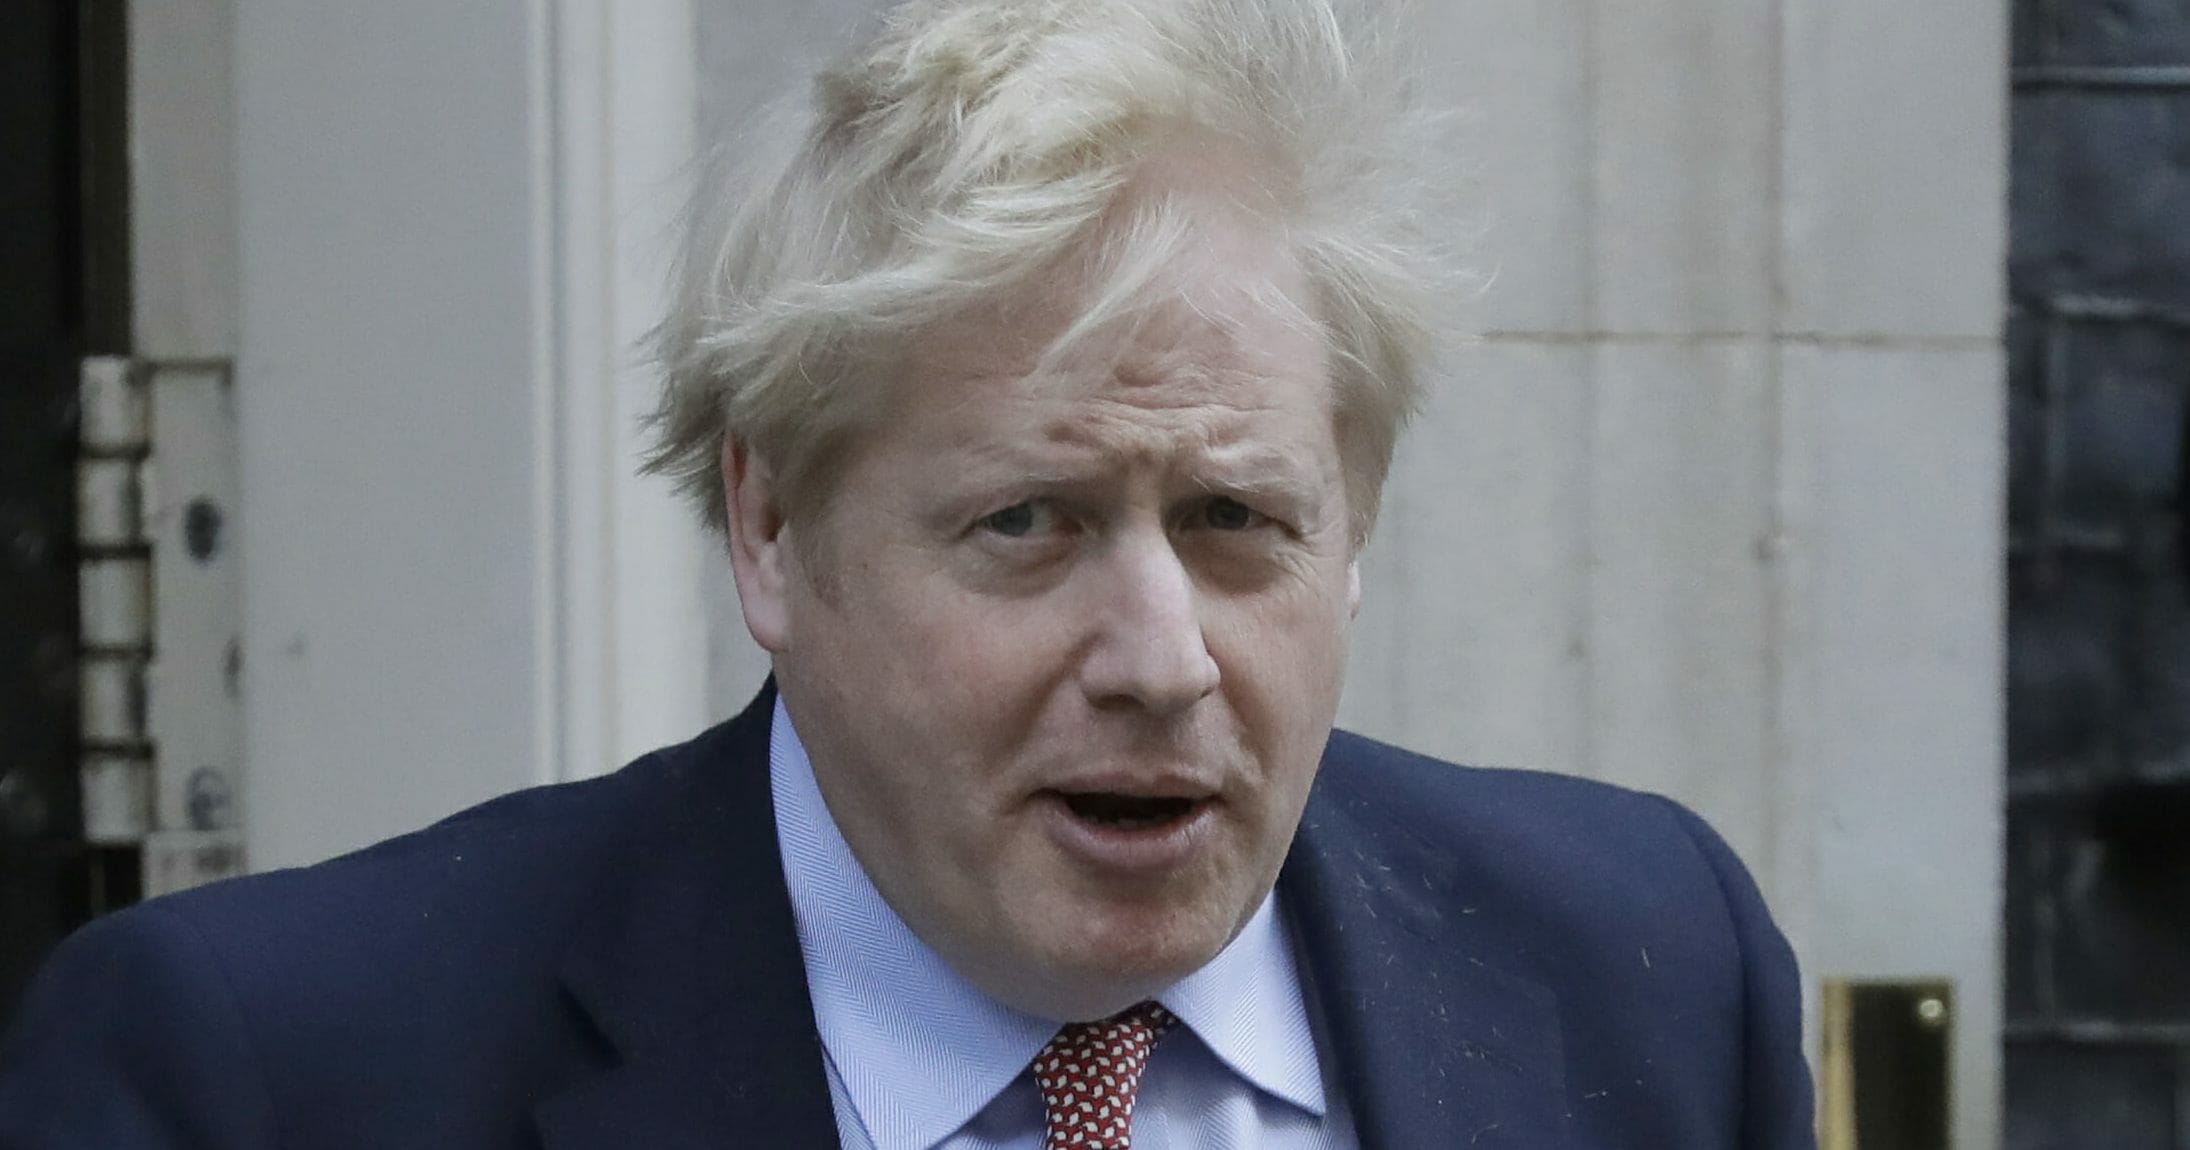 British Prime Minister Boris Johnson leaves 10 Downing Street for the House of Commons in London on March 25, 2020.